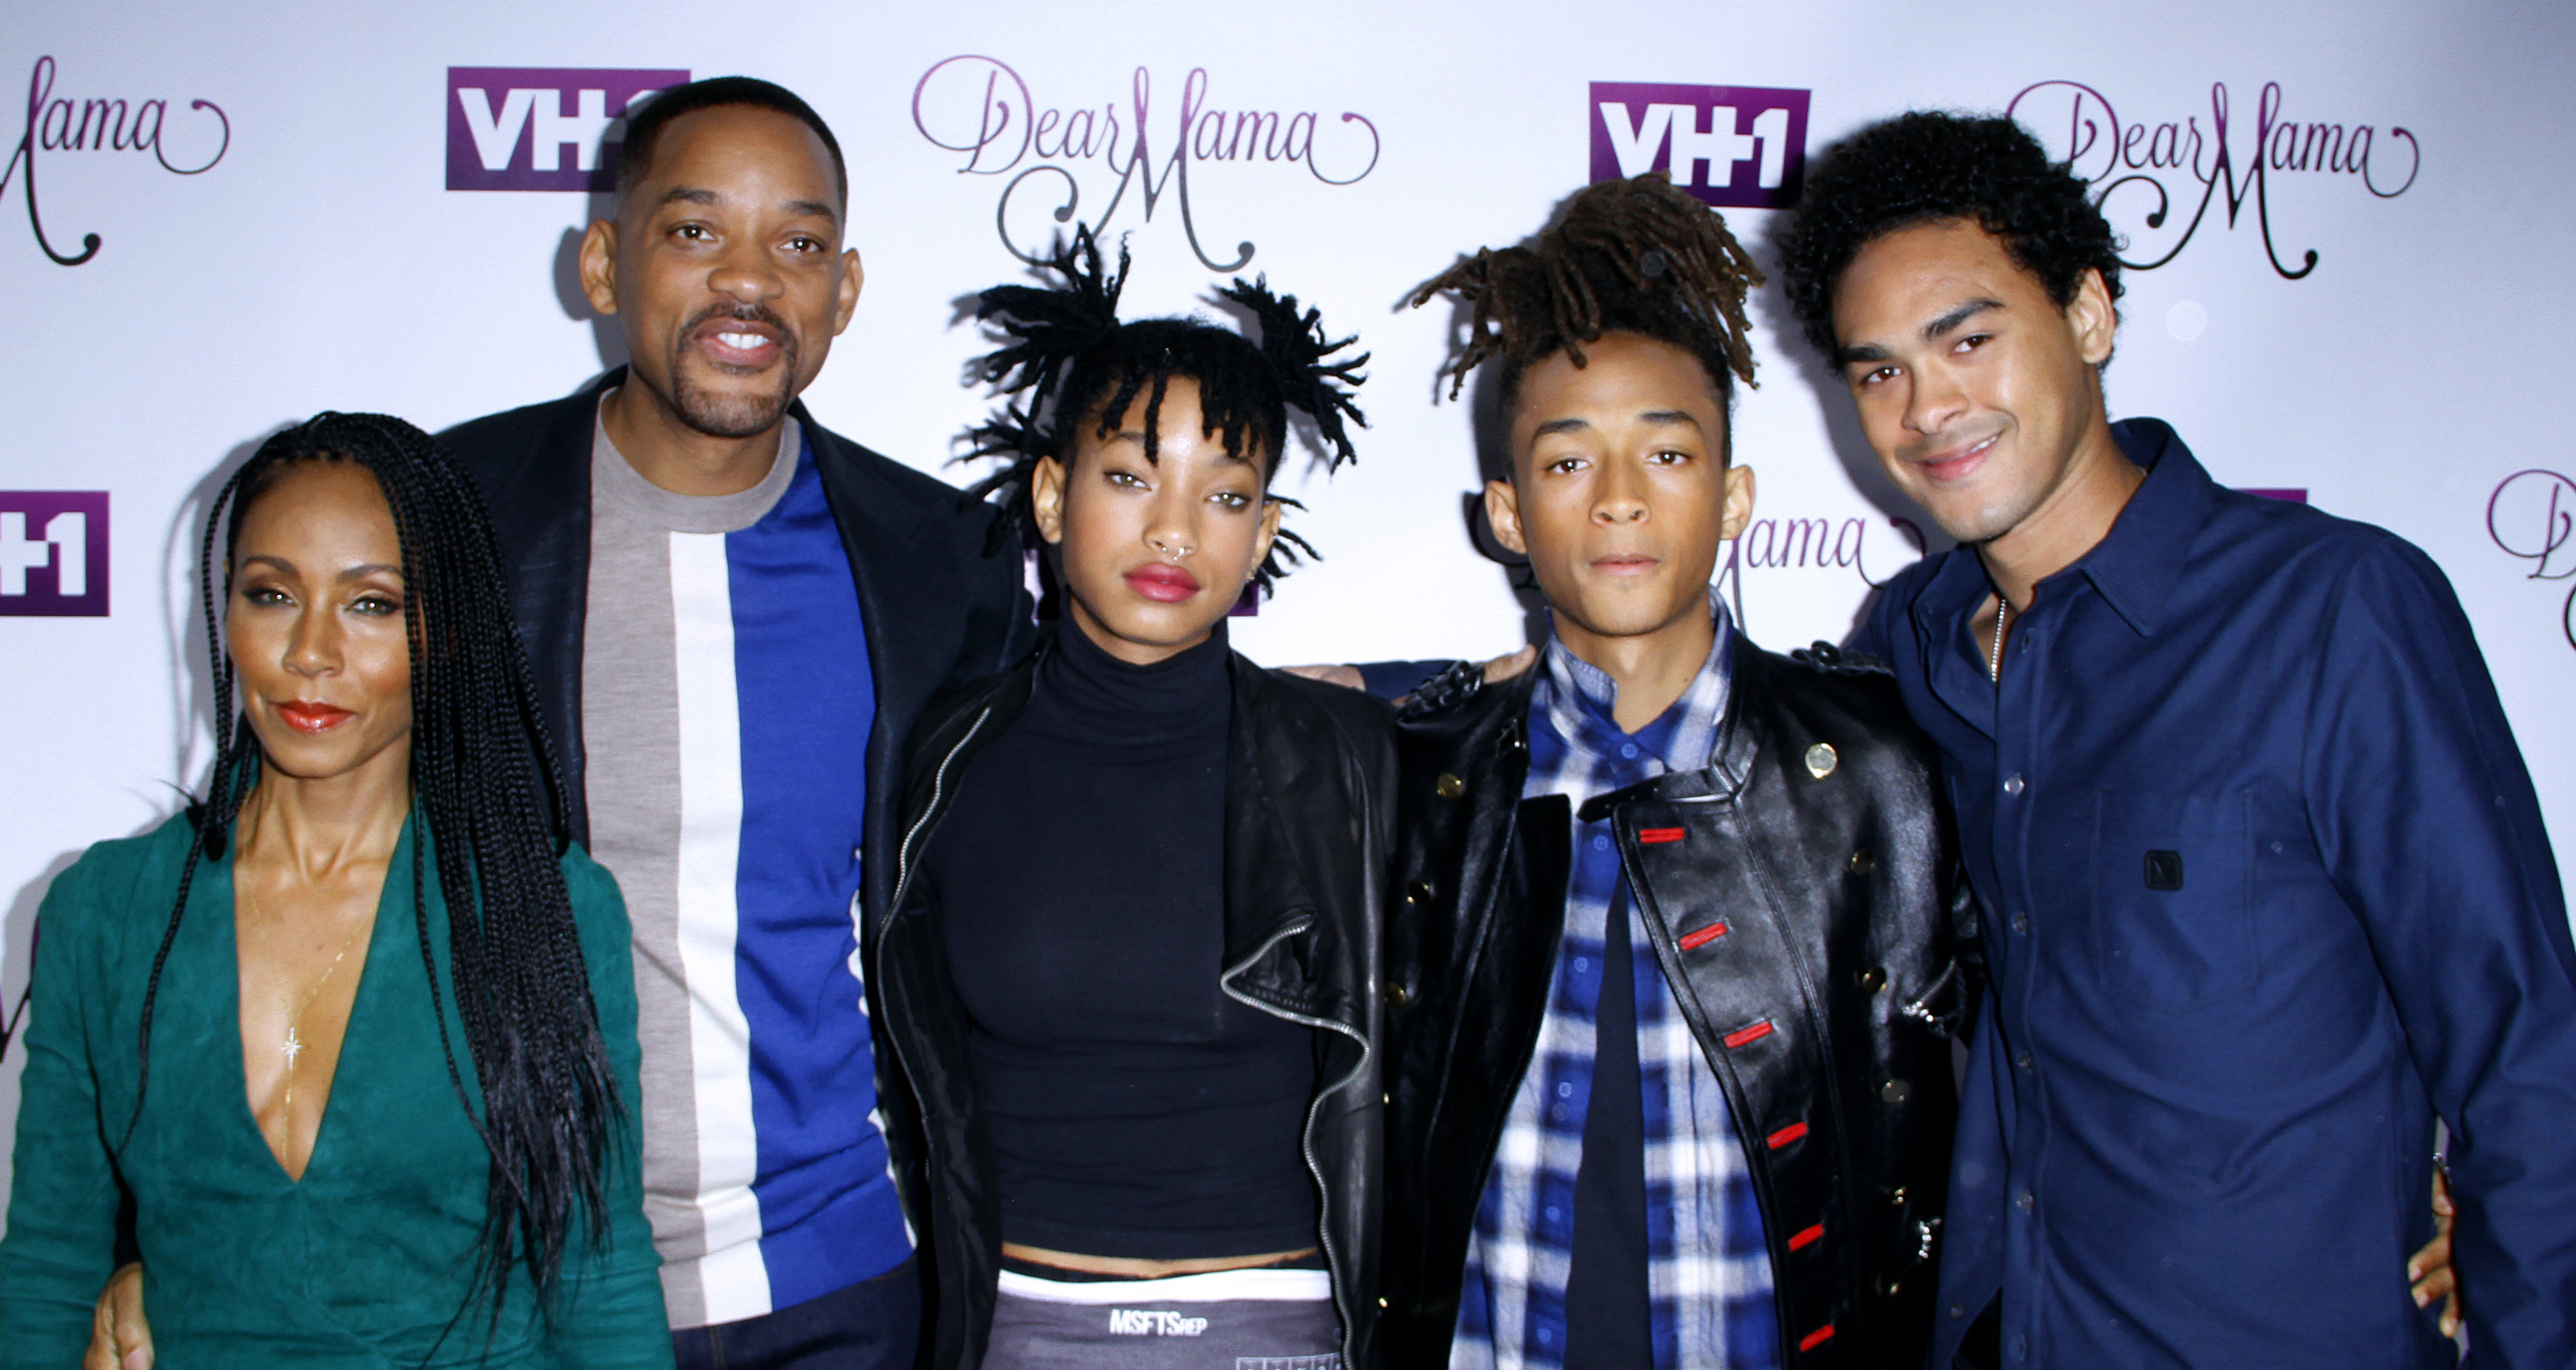 Will Smith and Jada Pinkett Smith's Kids: Meet Their Blended Family